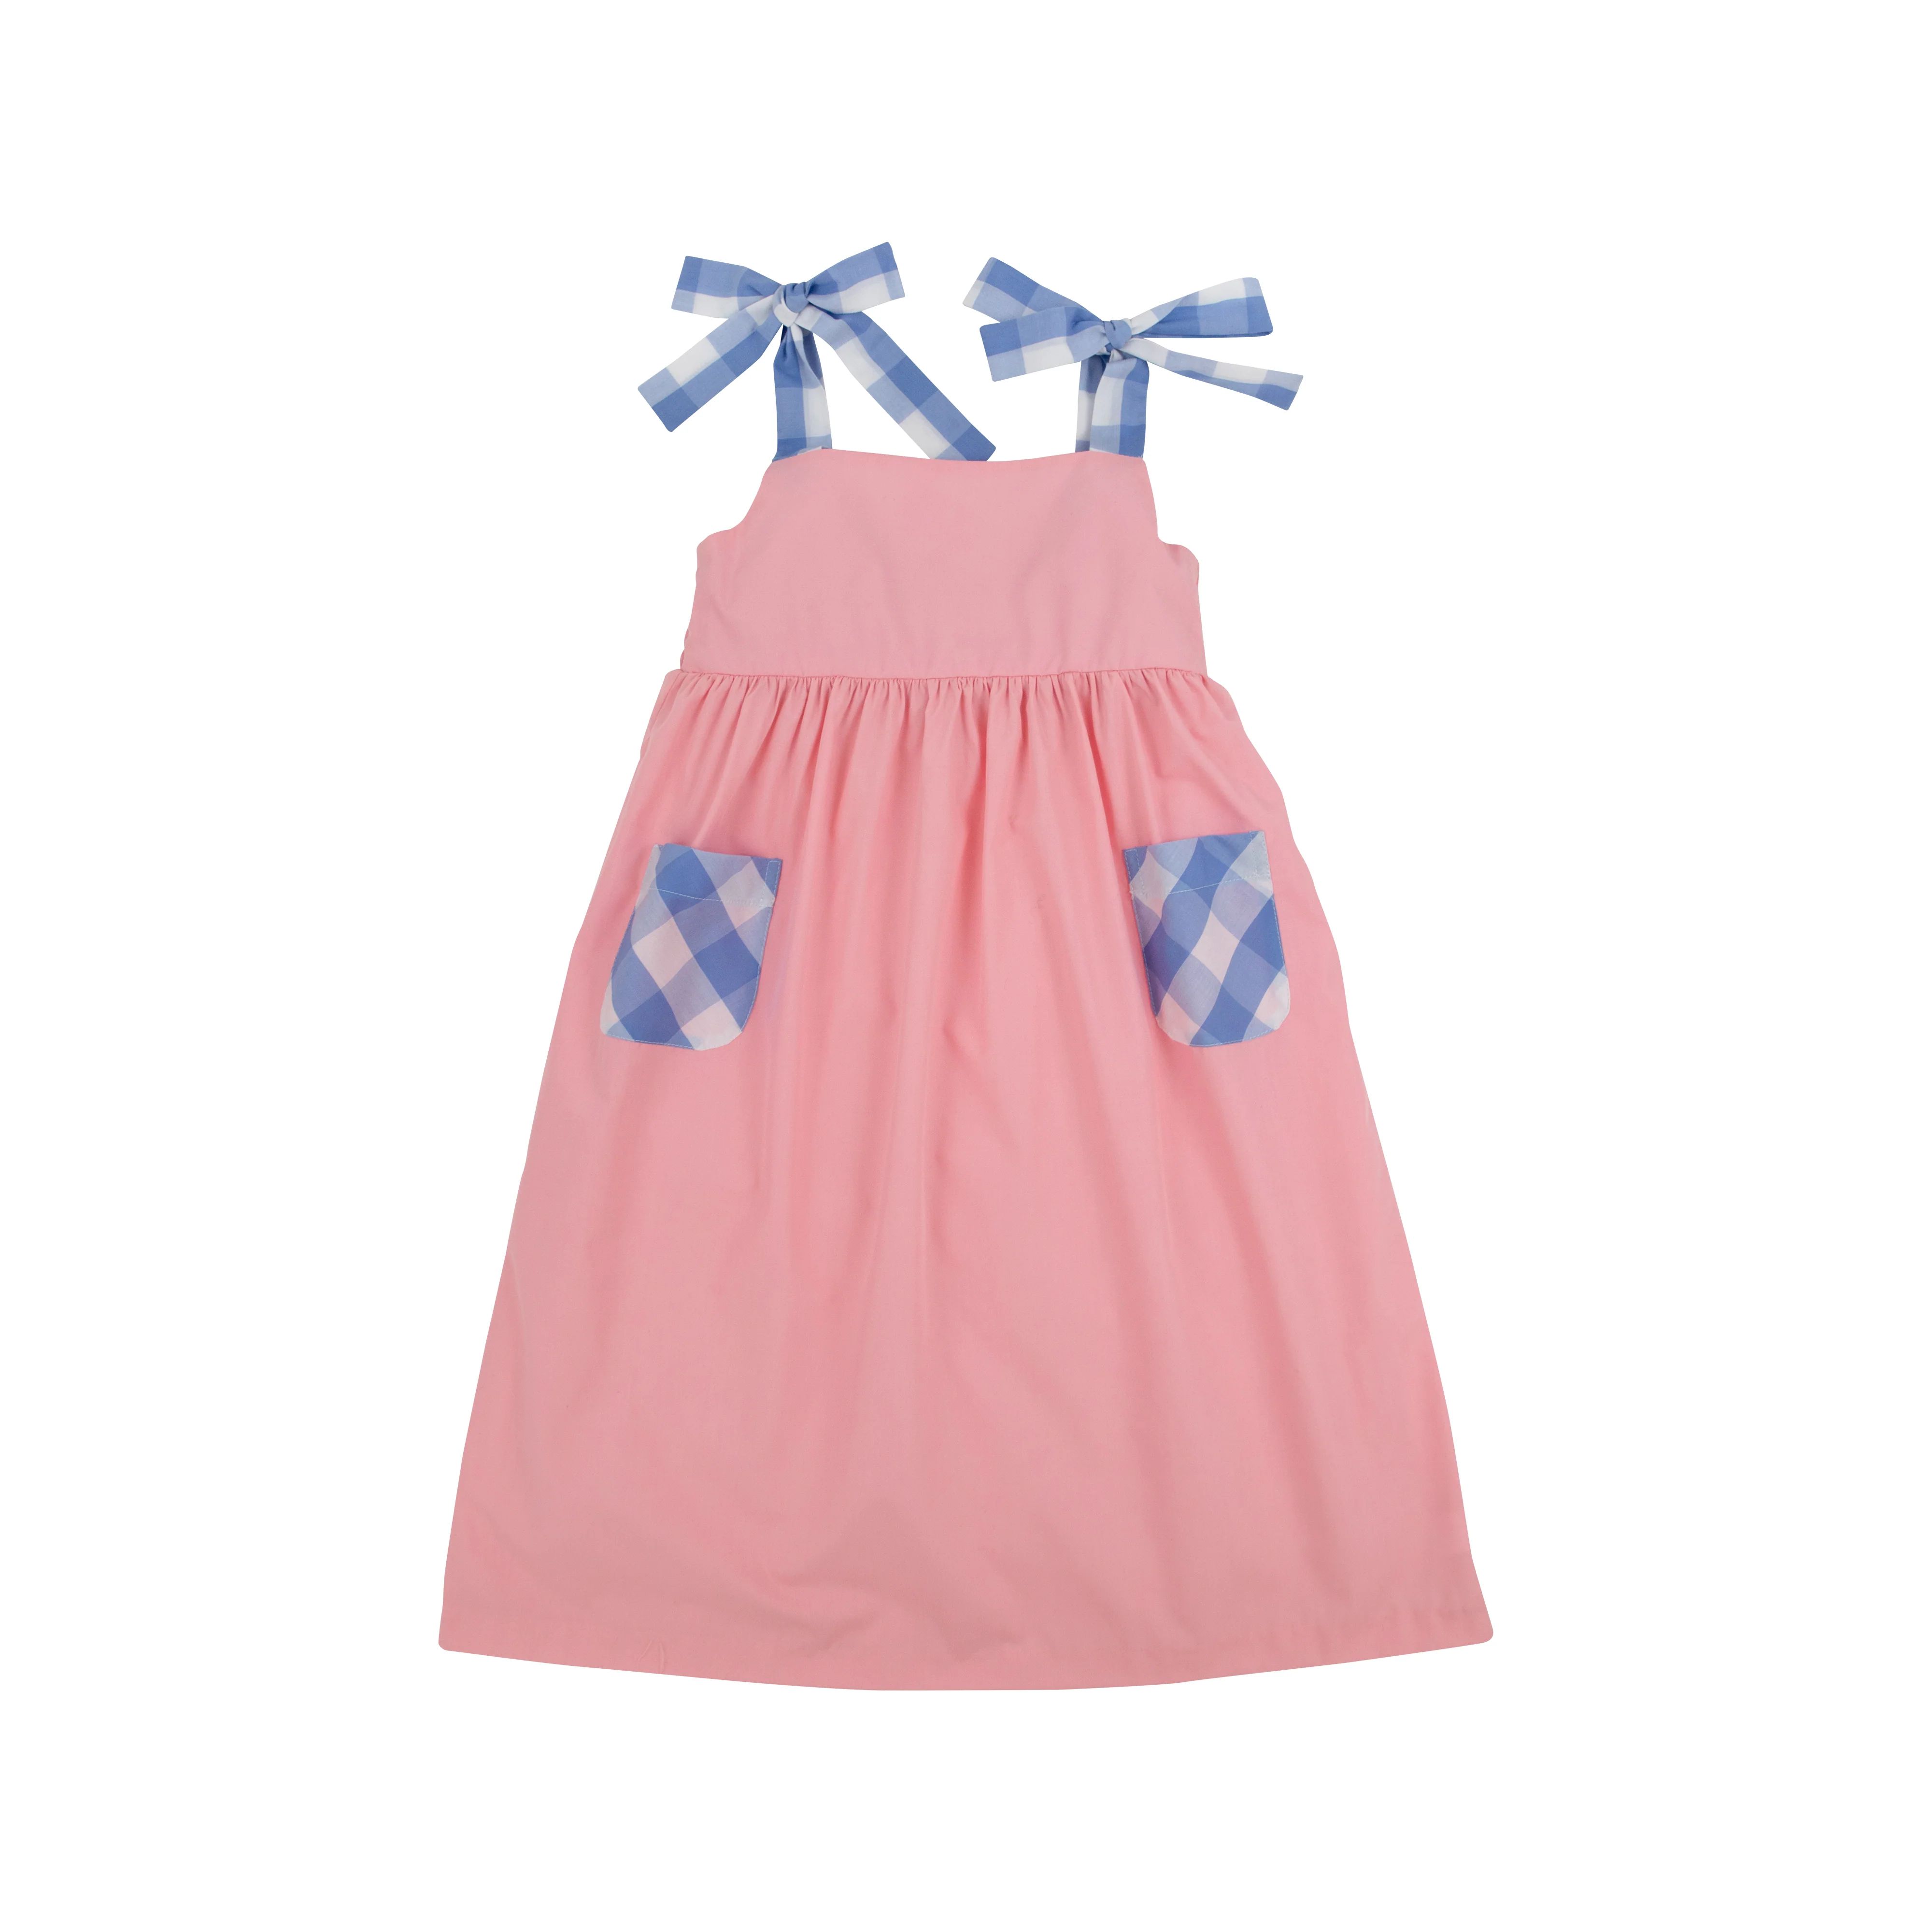 Macie Midi Dress - Sandpearl Pink with Park City Periwinkle Check | The Beaufort Bonnet Company